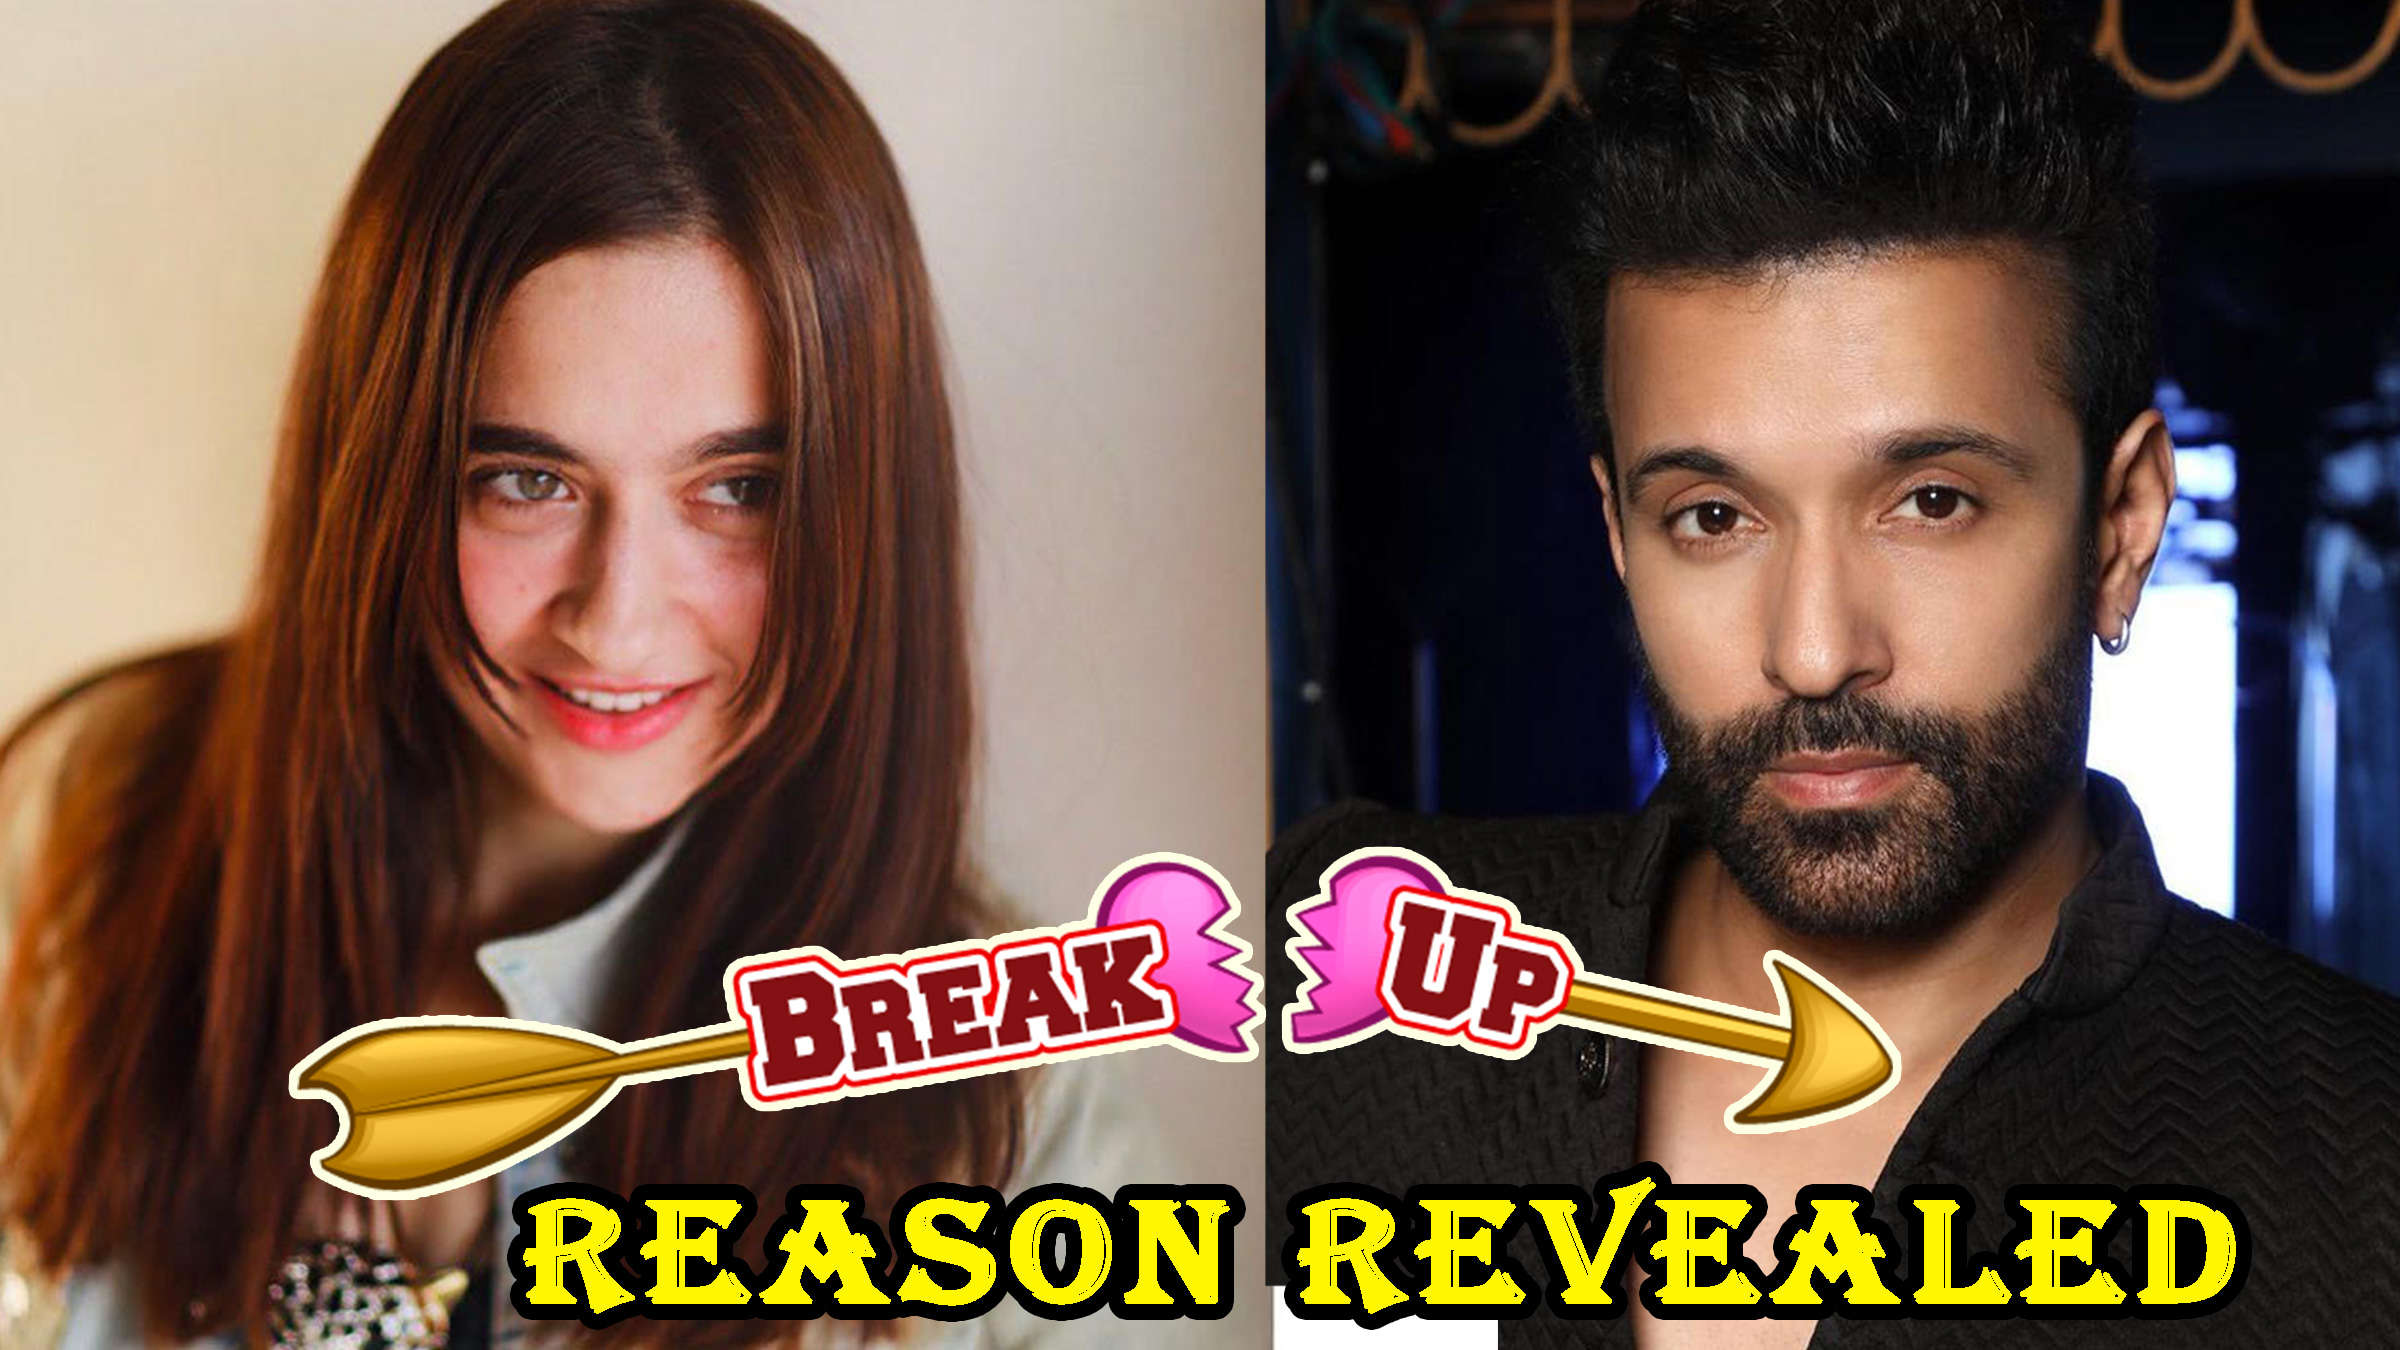 Here’s The Real Reason Behind Sanjeeda Shaikh And Aamir Ali’s Split Up